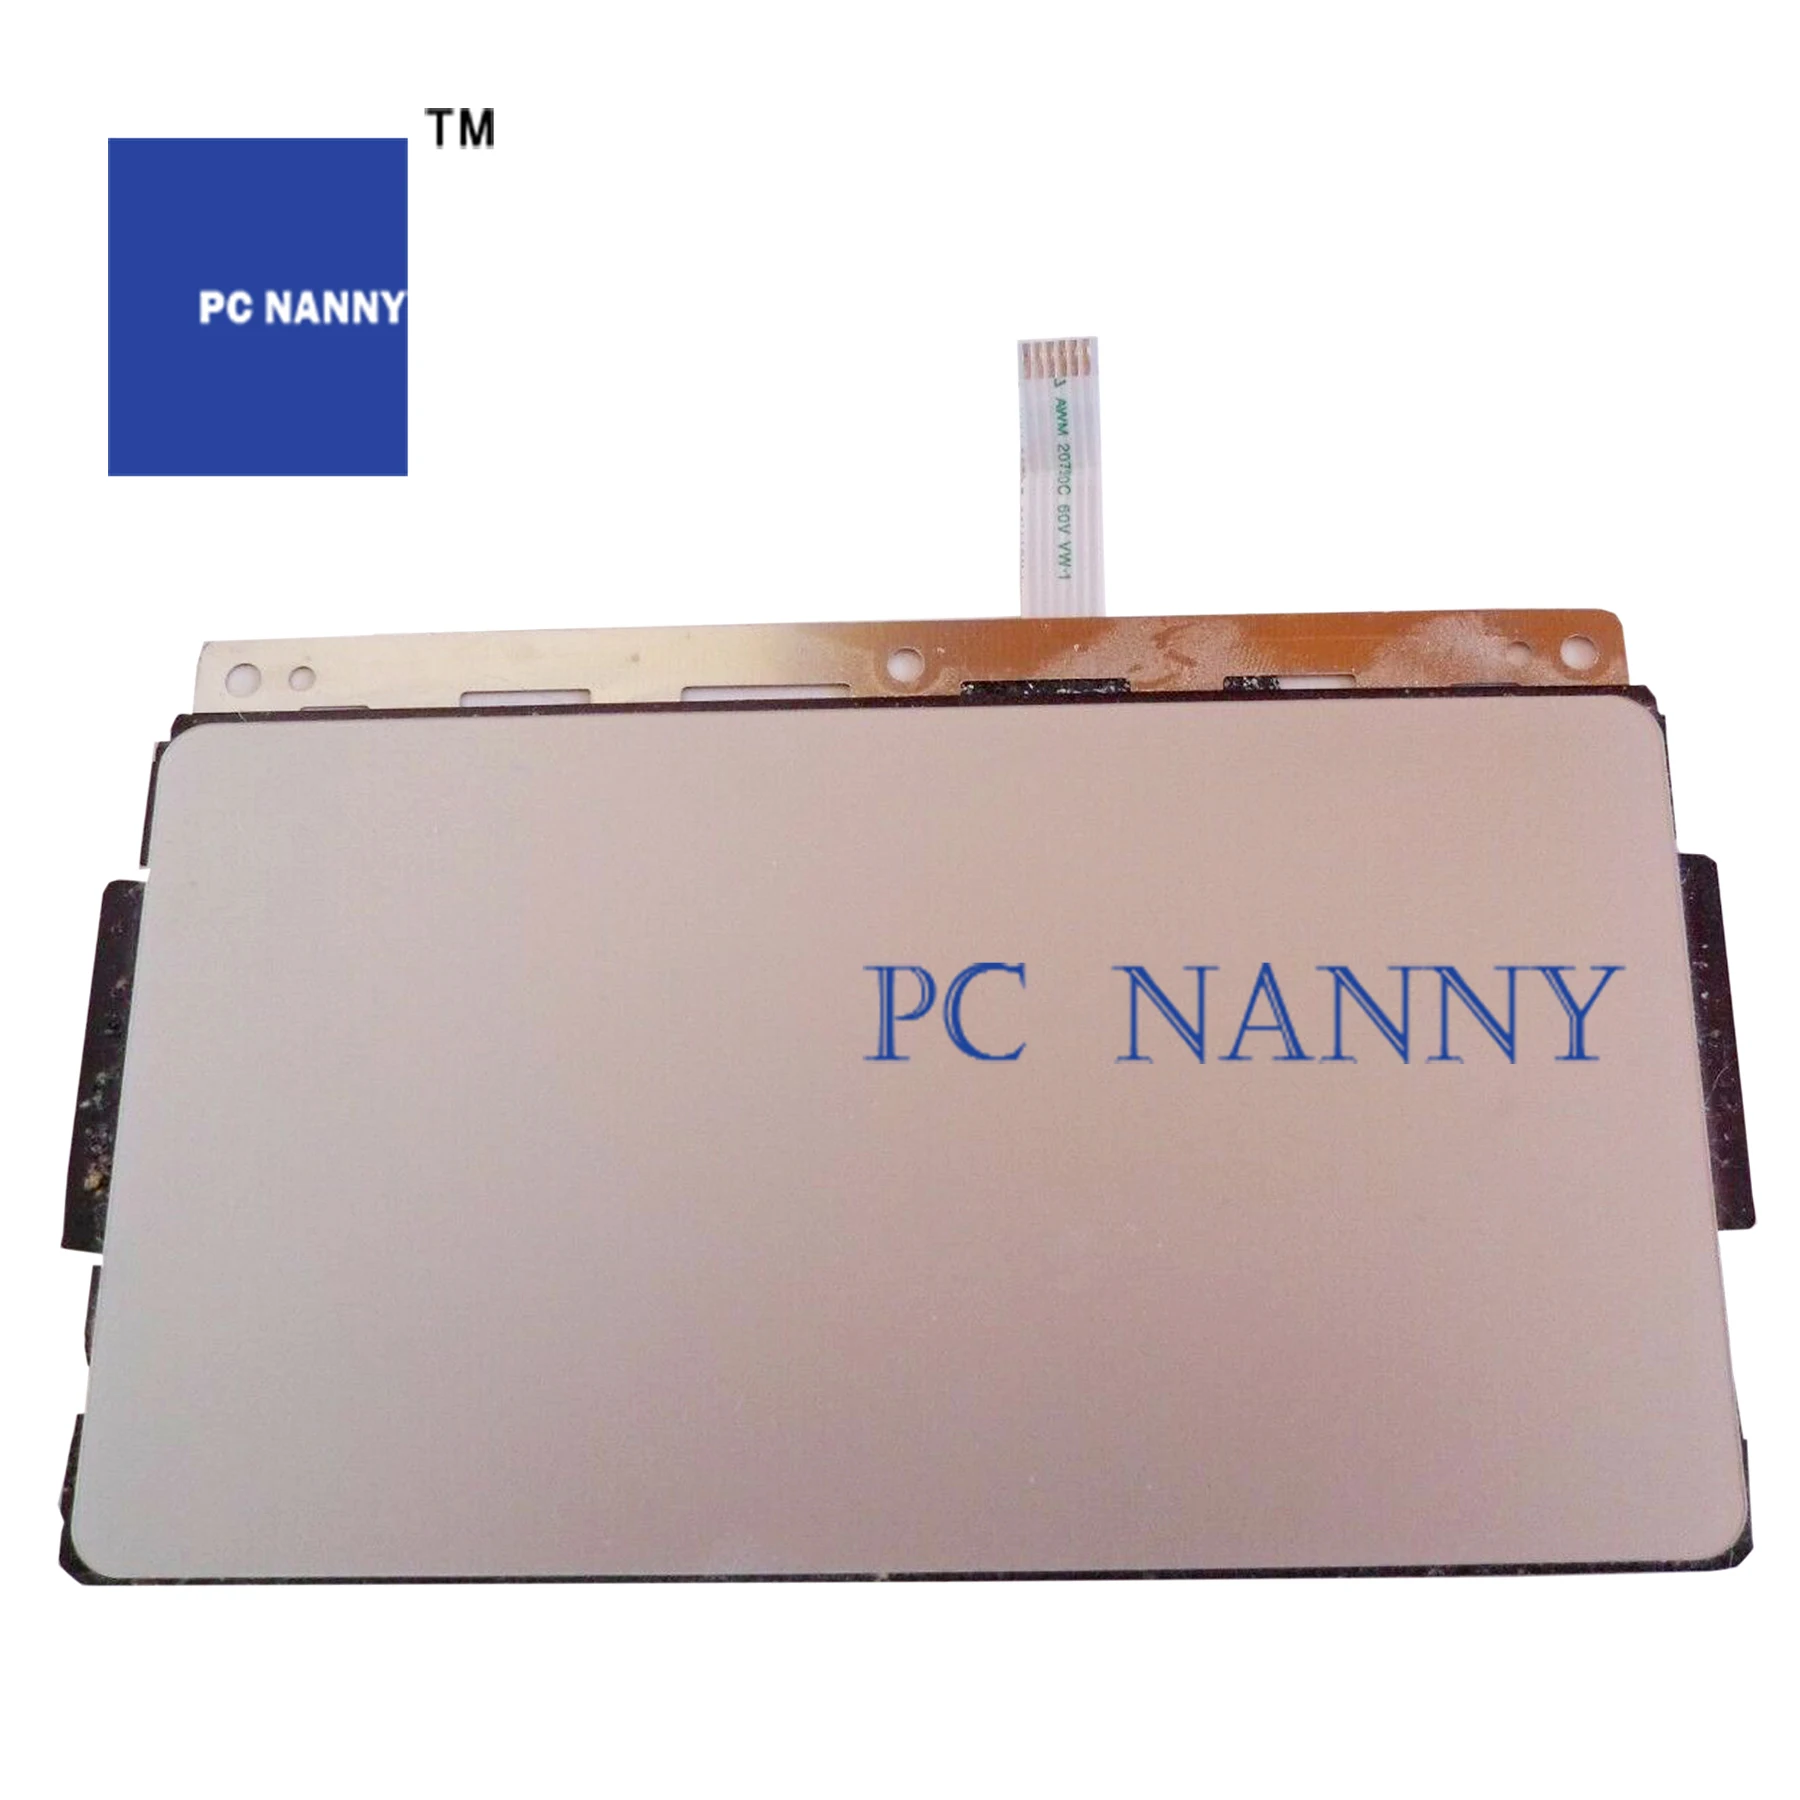 

PCNANNY FOR HP Envy M7-U009dx 17T-U100 M7-U 17-U TouchPad w/ Cable TM-03232-001 test good